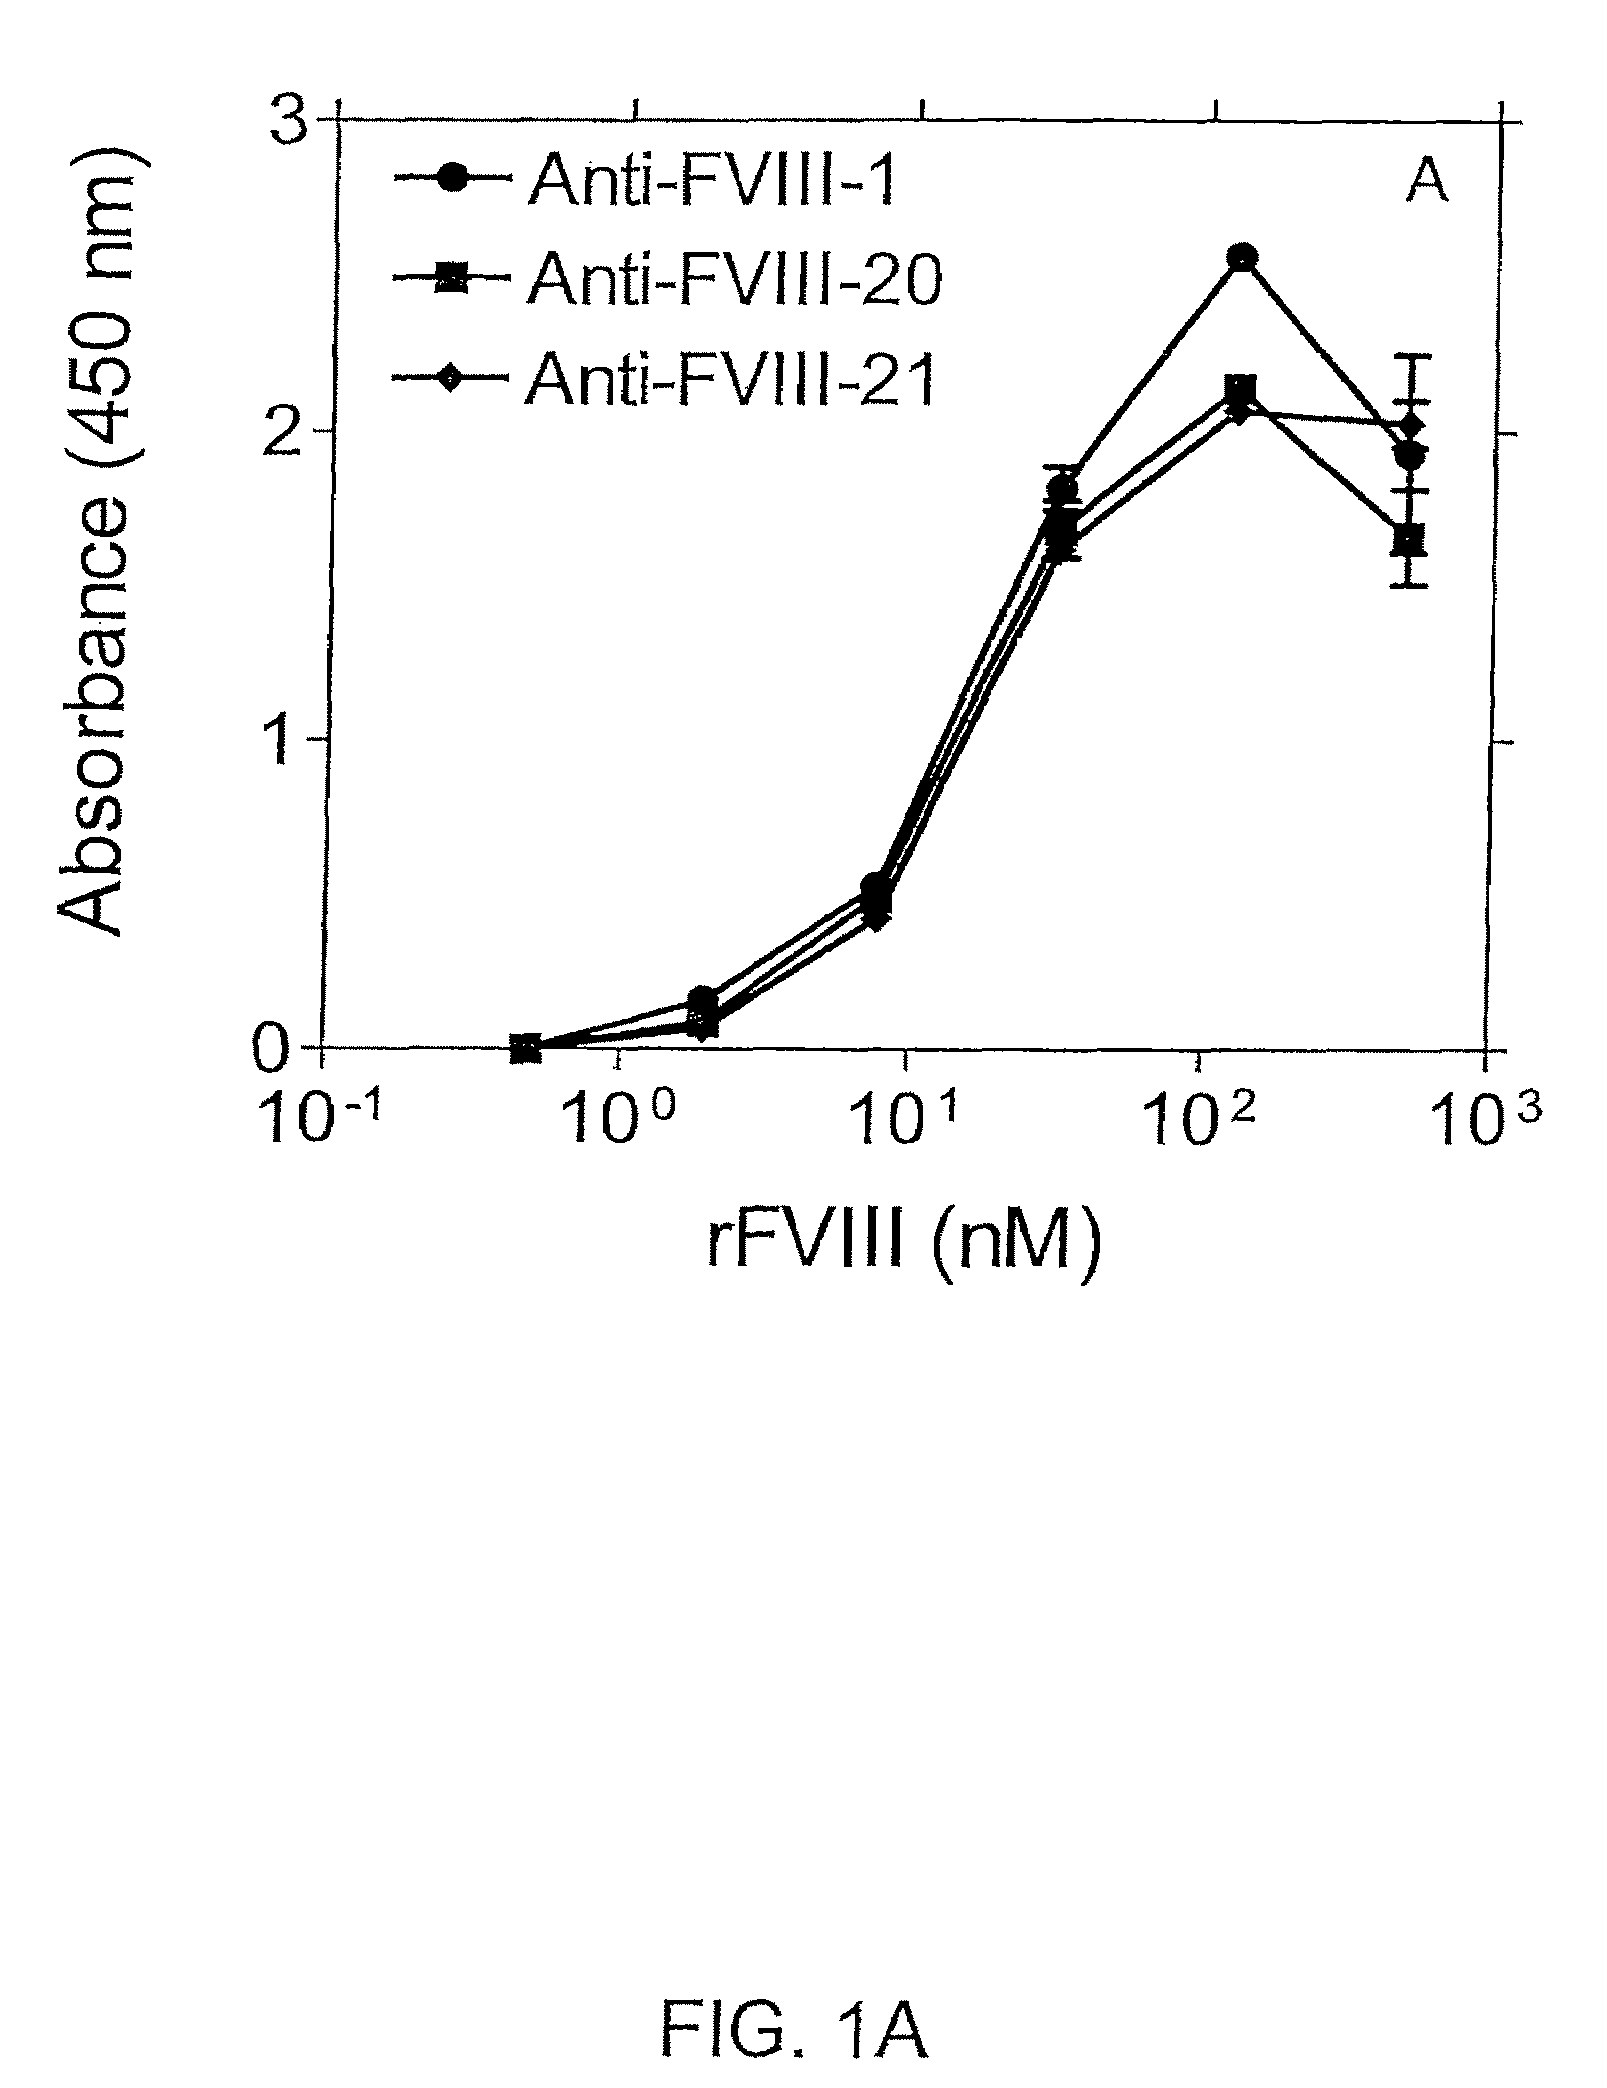 Highly sensitive immunoassays and antibodies for detection of blood factor VIII